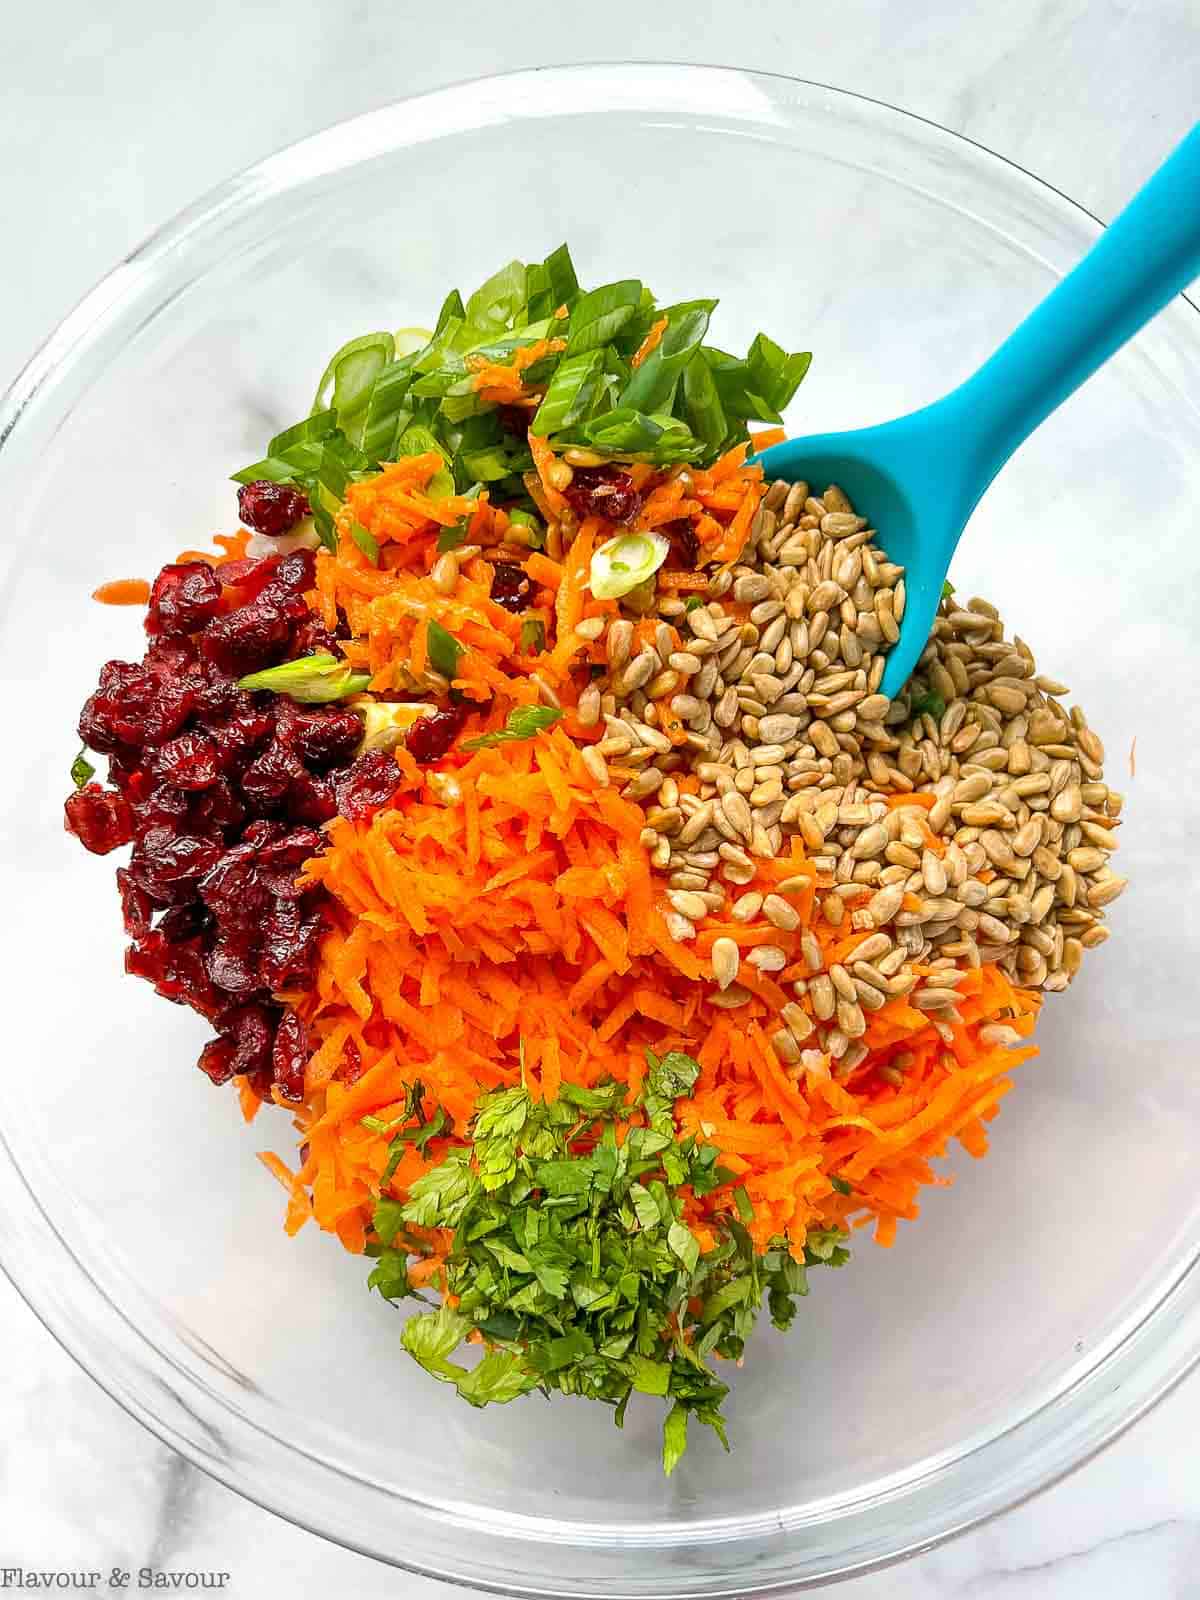 Ingredients for carrot salad in a glass bowl.